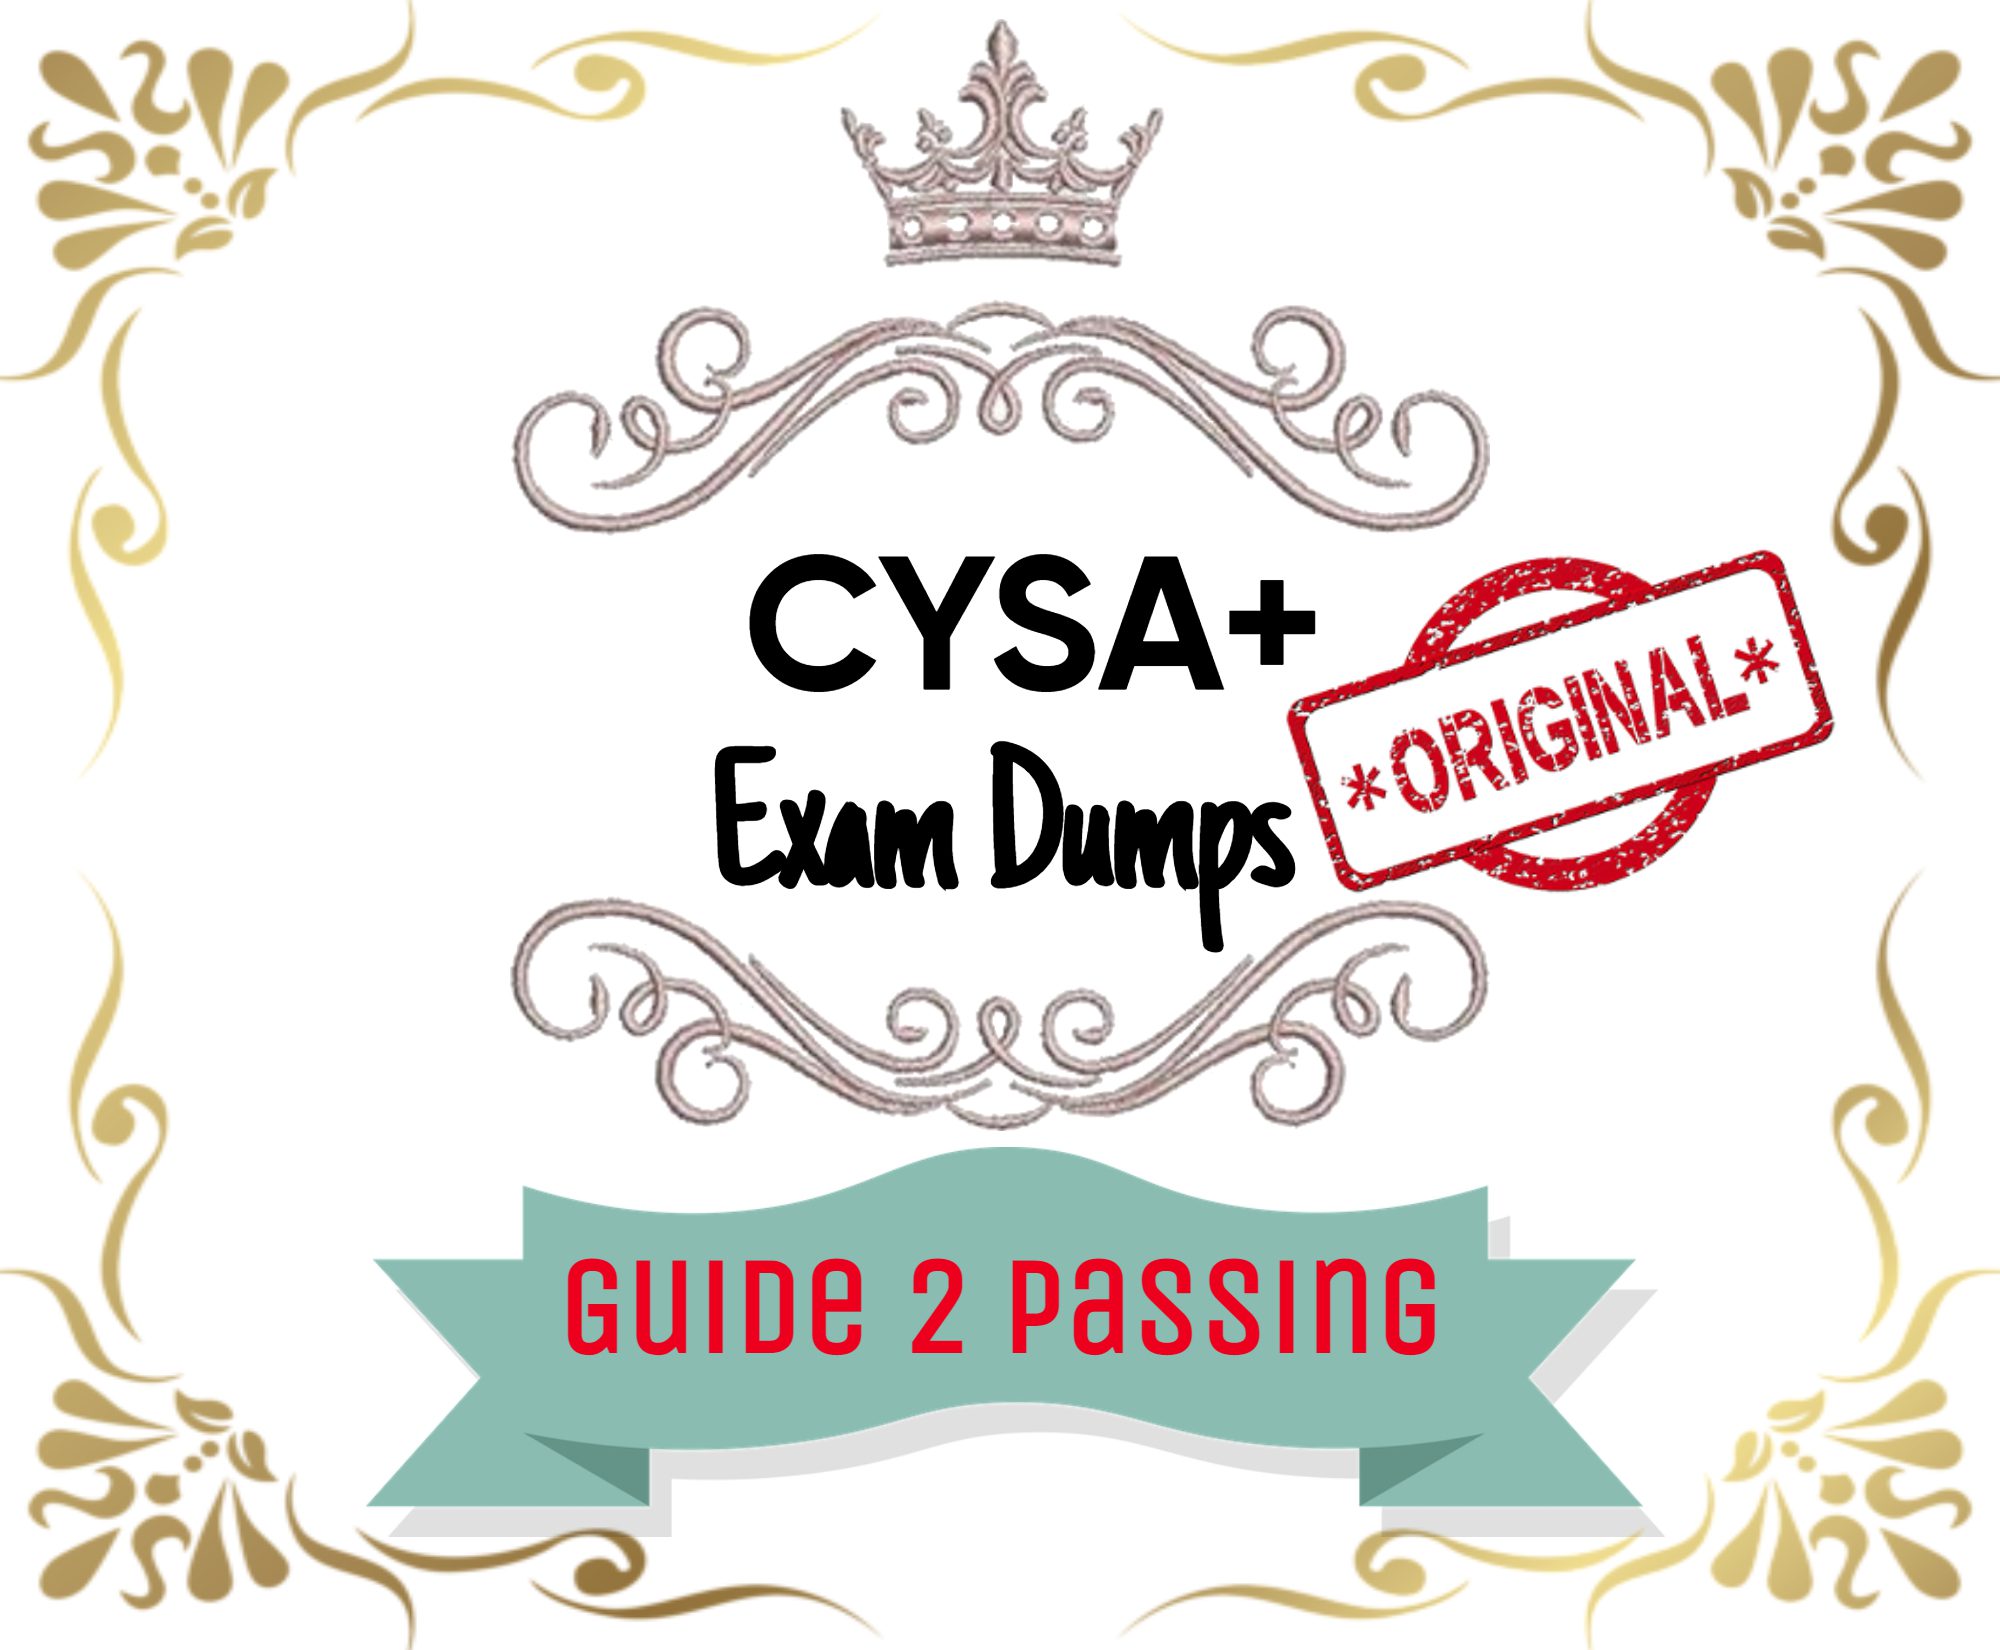 Pass Your CompTIA CySA+ Exam Dumps From Guide 2 Passing